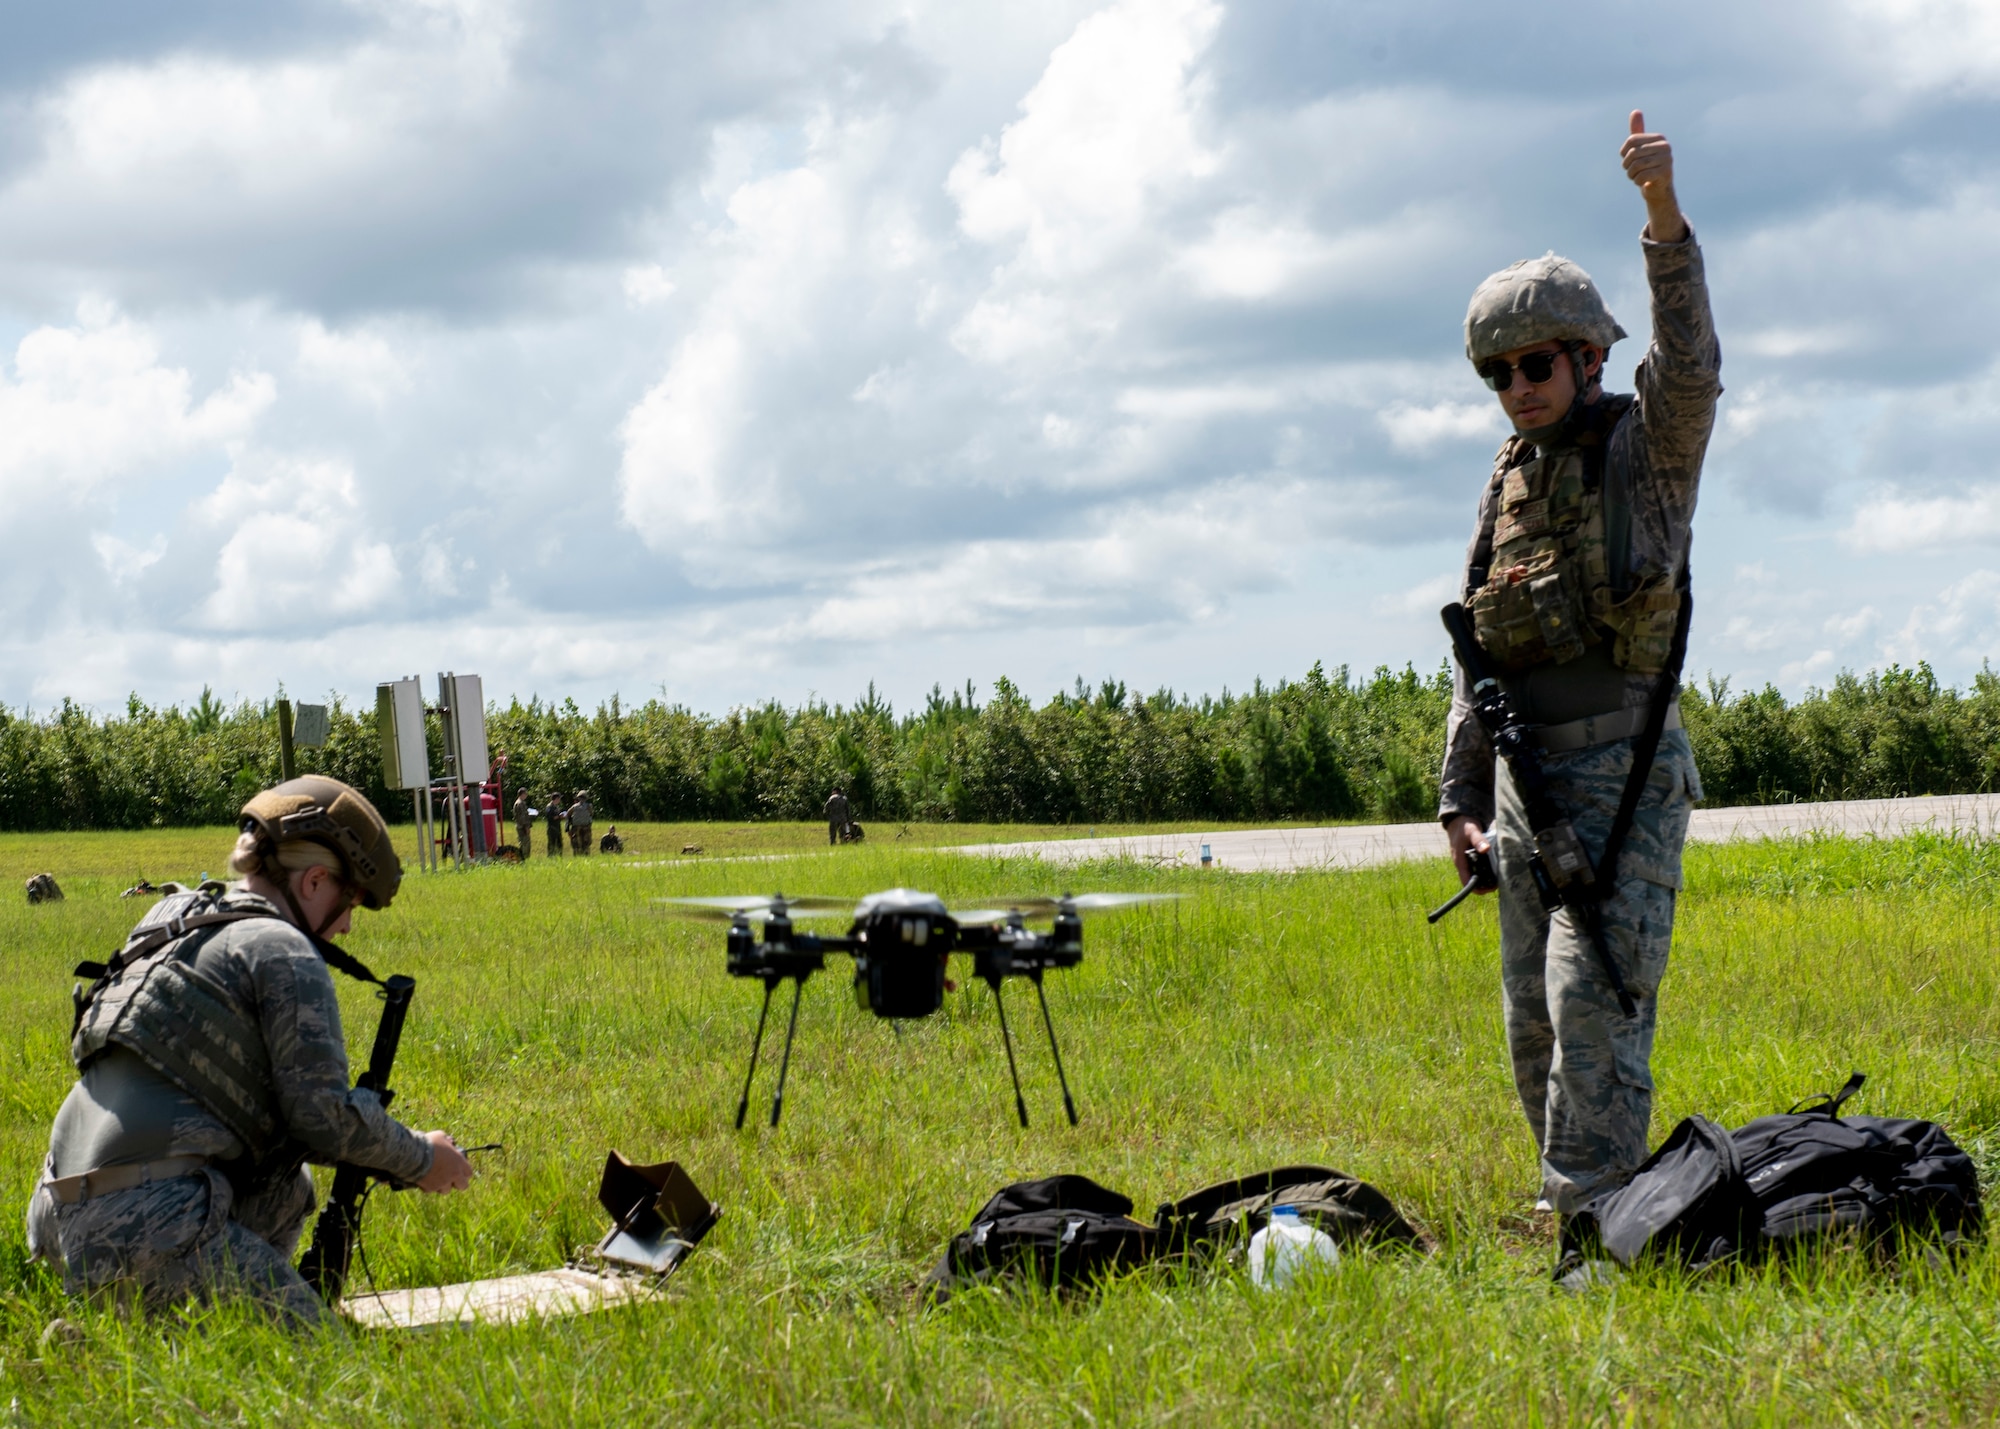 Airmen from Seymour Johnson Air Force Base deploy an Unmanned Aerial Vehicle during Joint Exercise Razor Talon at Cherry Point Marine Corp Air Station, North Carolina, Aug. 12, 2020.